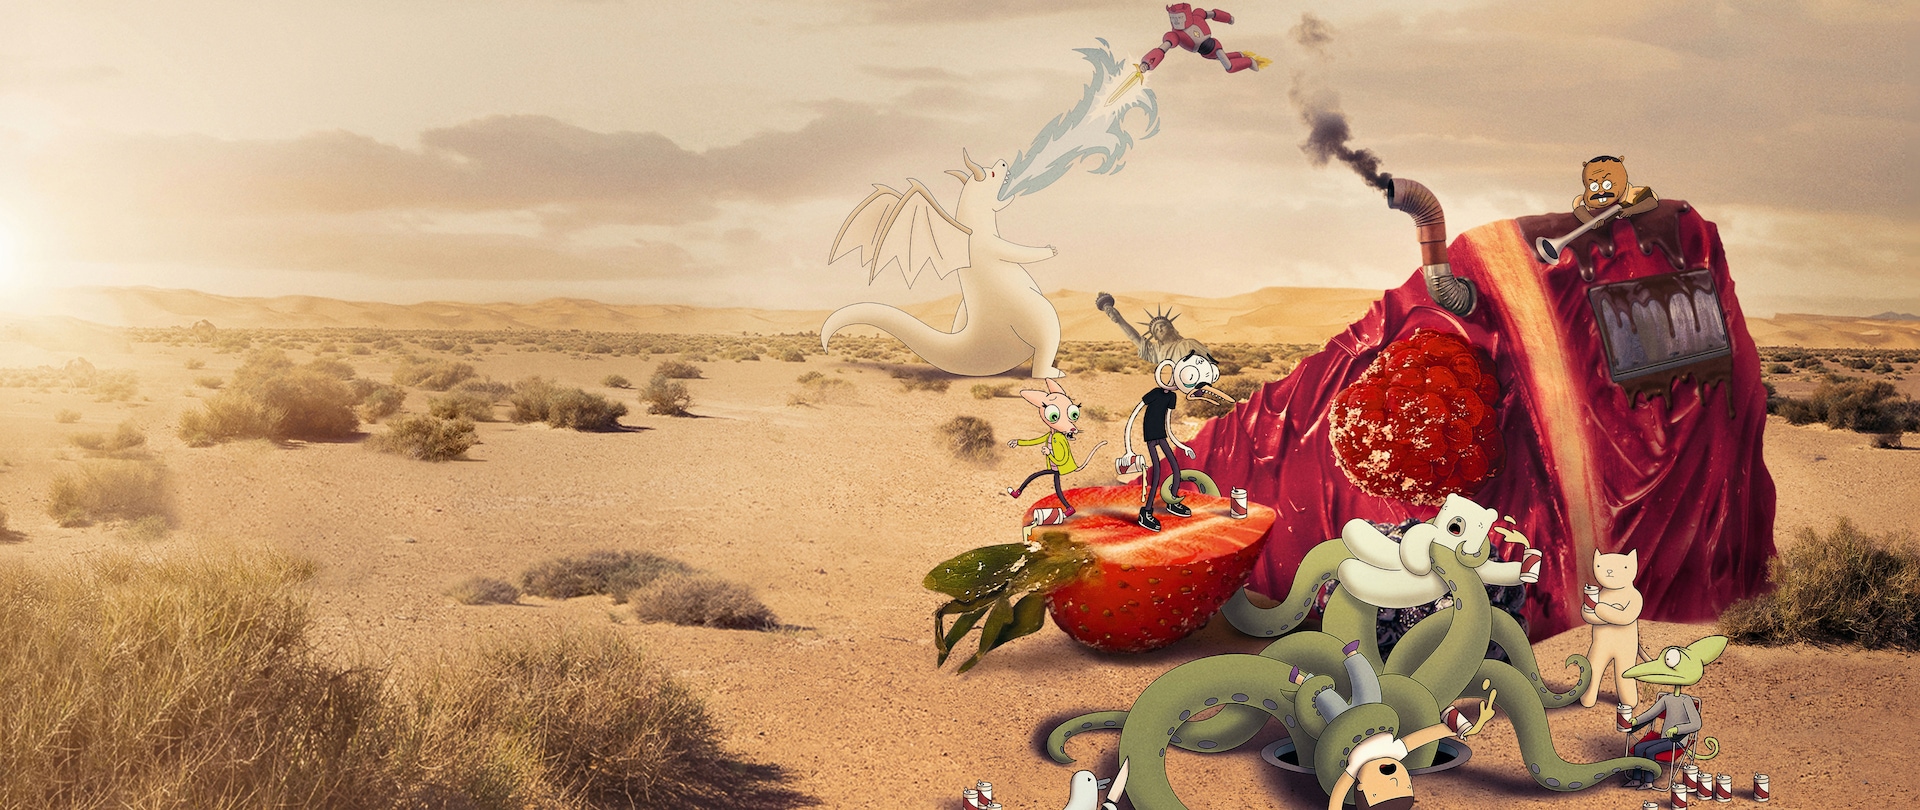 Cartoon cheesecake surrounded by food and monsters fighting in realistic desert setting for Cake show